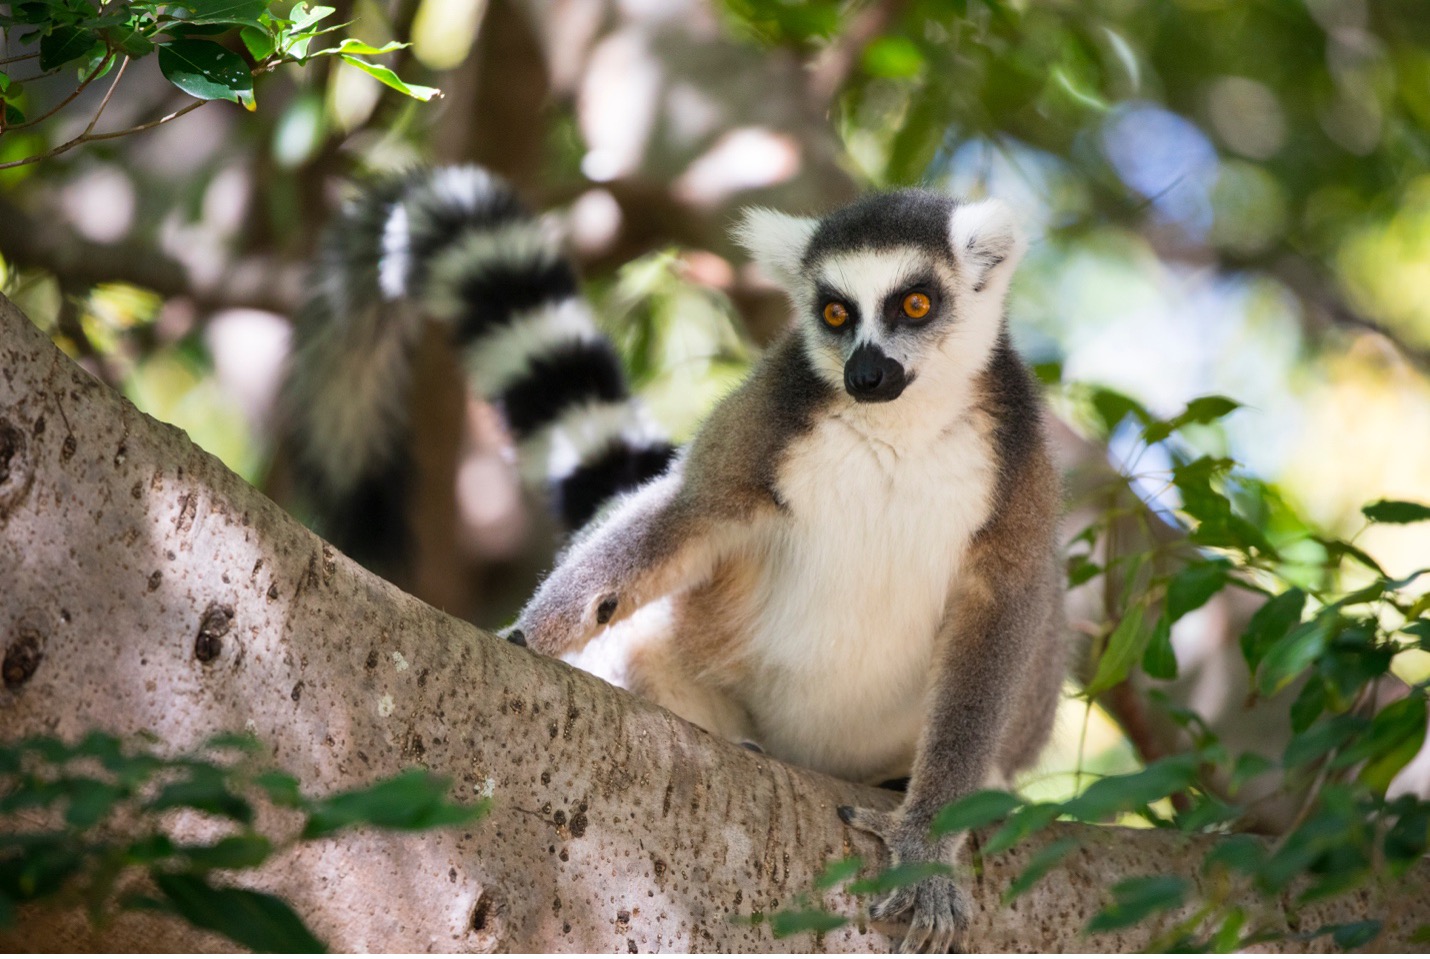 ring tailed lemur sits in a tree with a forested, brushy background